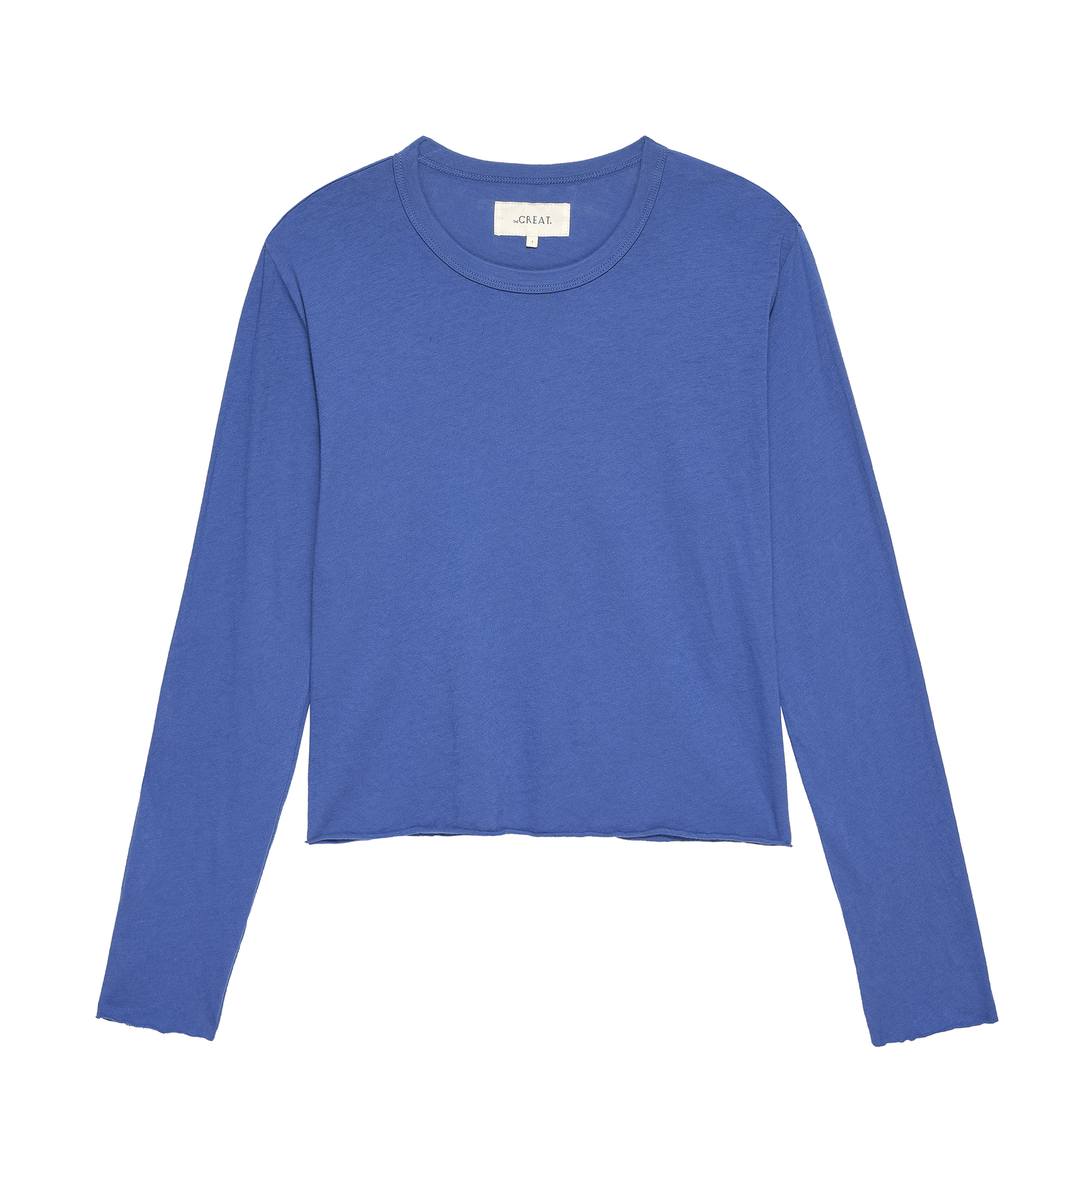 The Great - The Long Sleeve Crop Tee in Glacier Blue